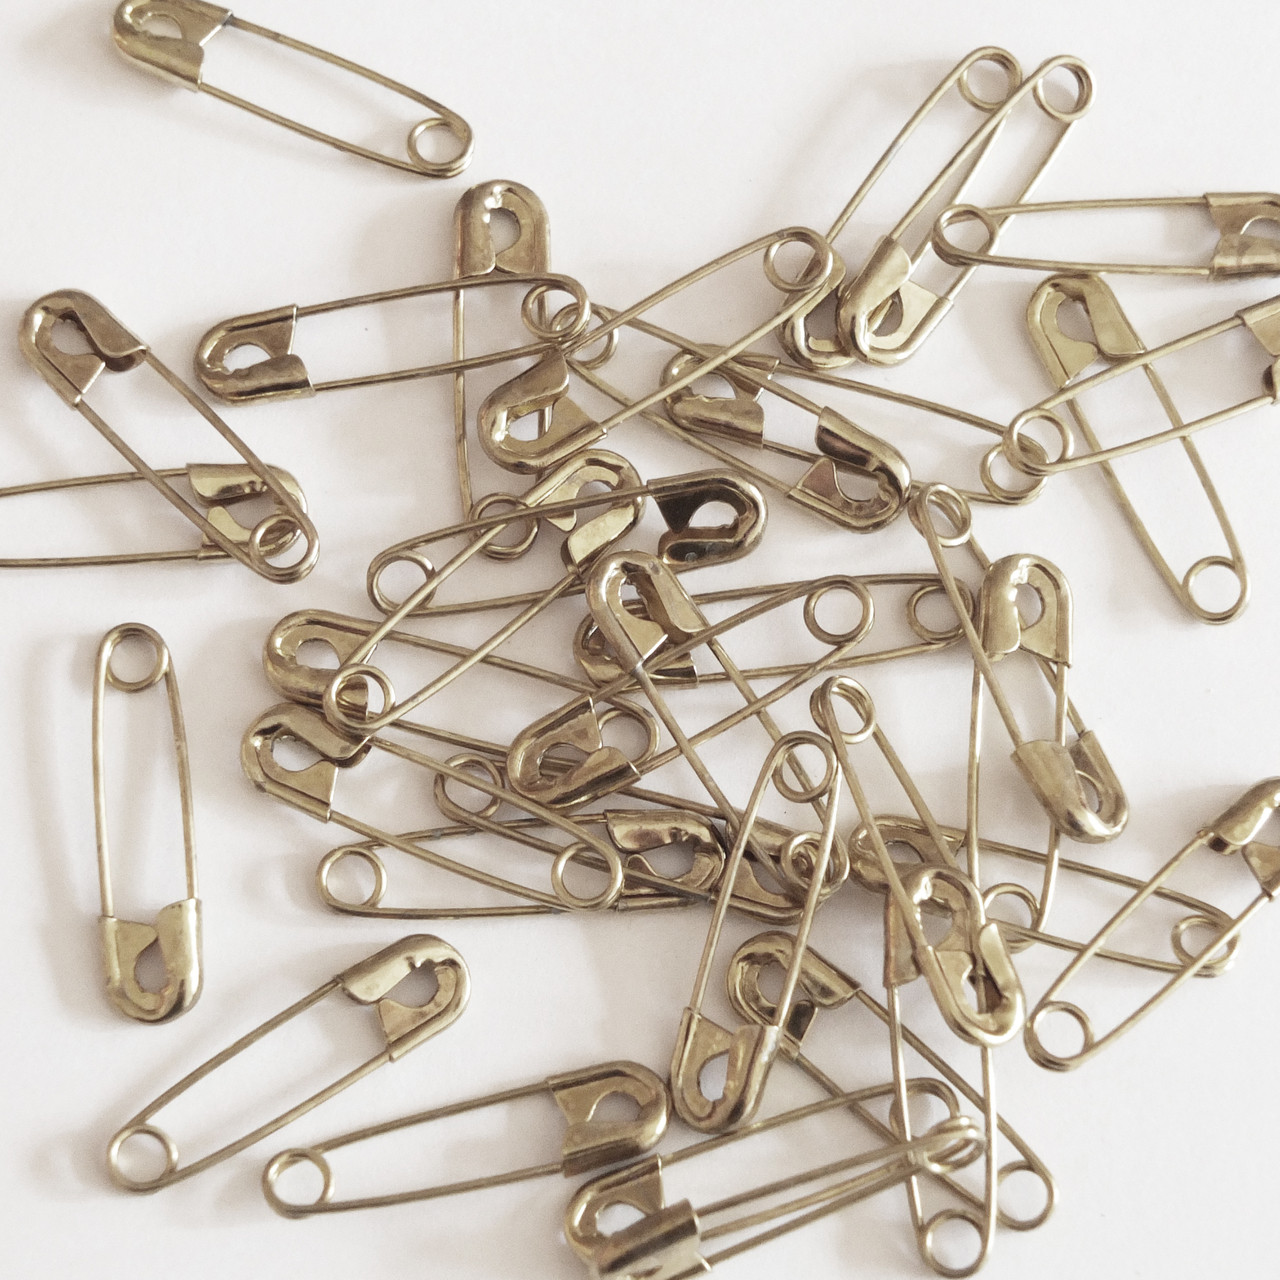 How many solidarity safety pins have been sold on ?